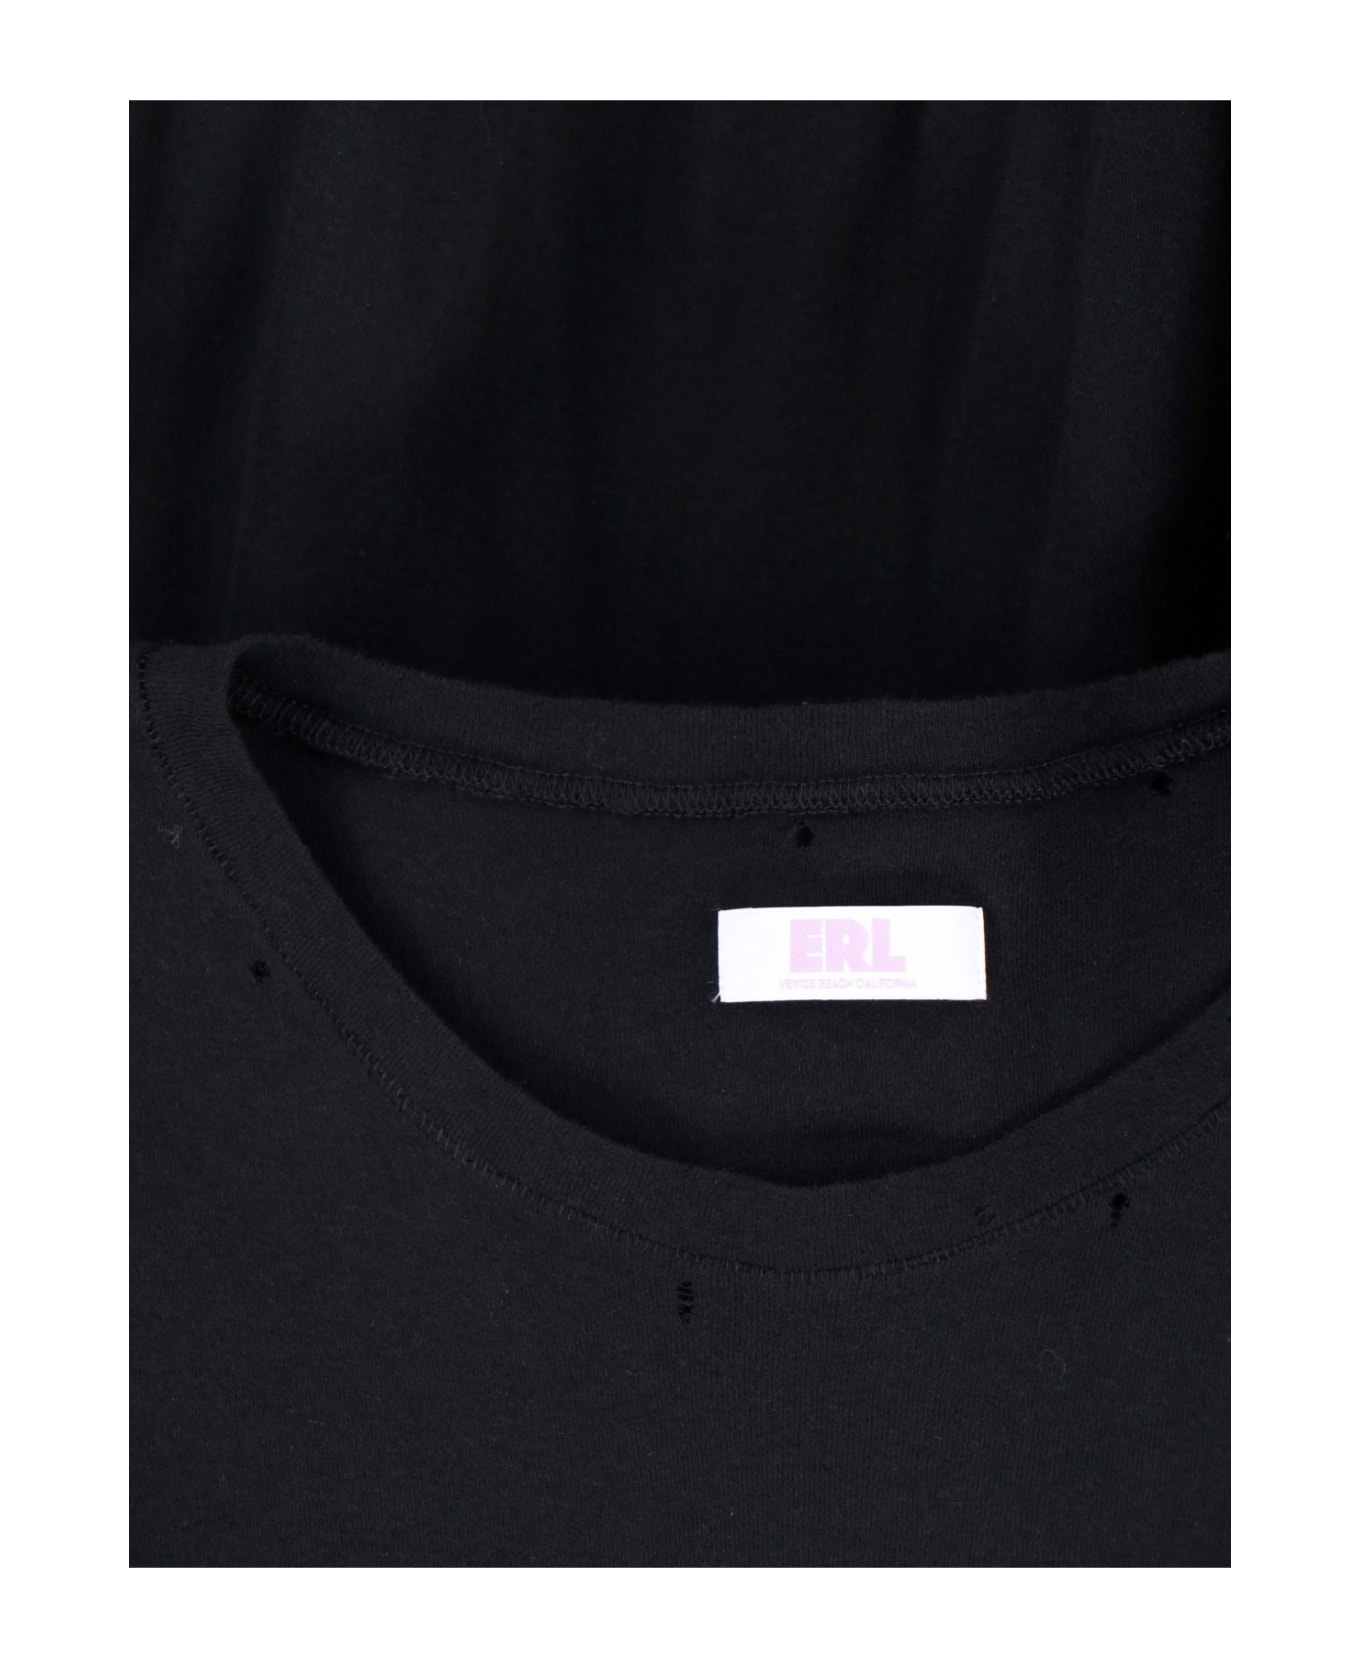 ERL 'baby' T-shirt - Faded Black